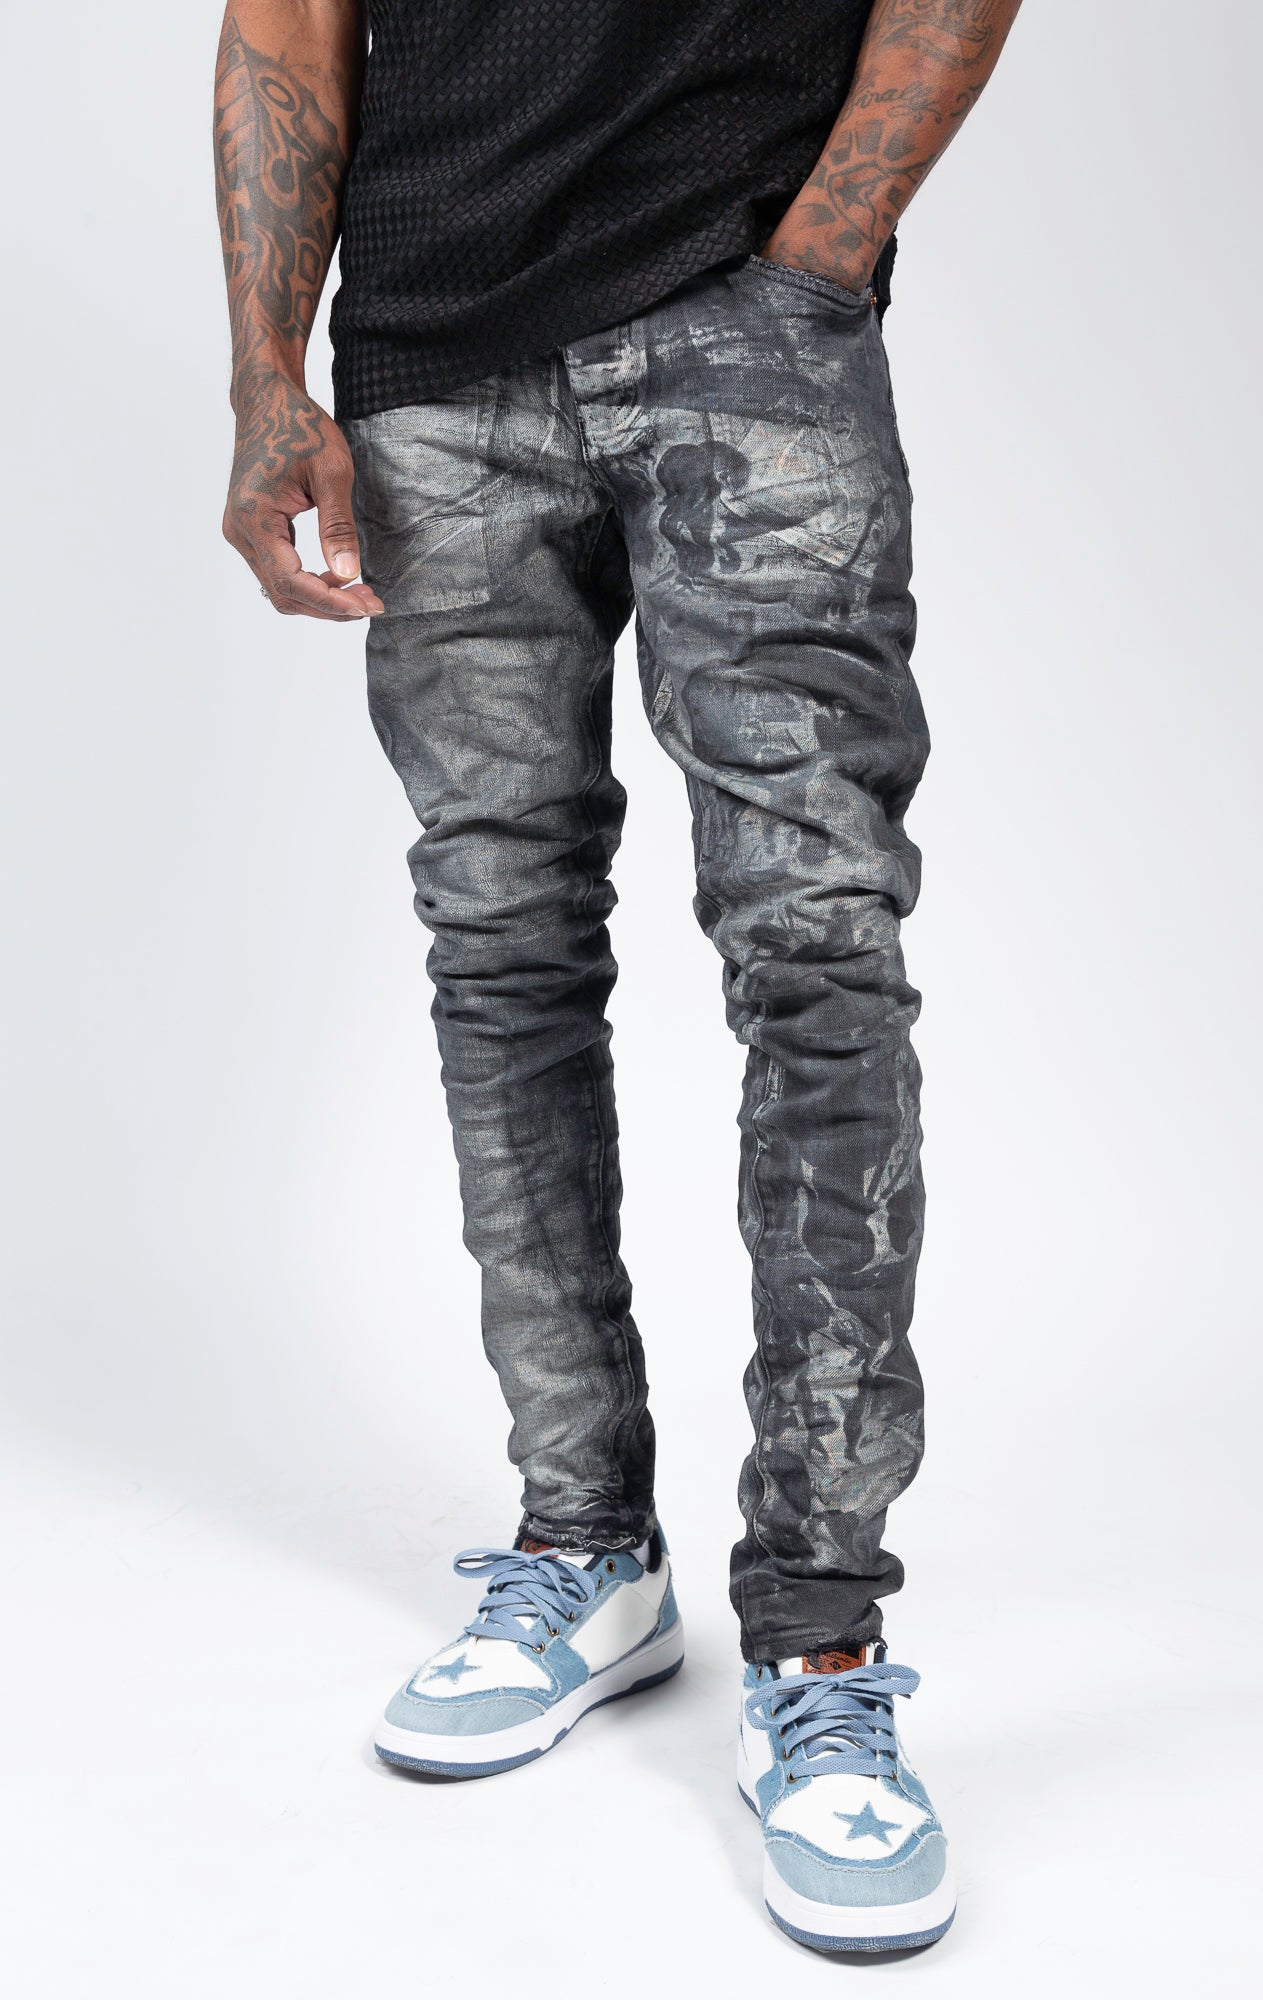 Black jean wash low-rise skinny jeans with distressed detailing